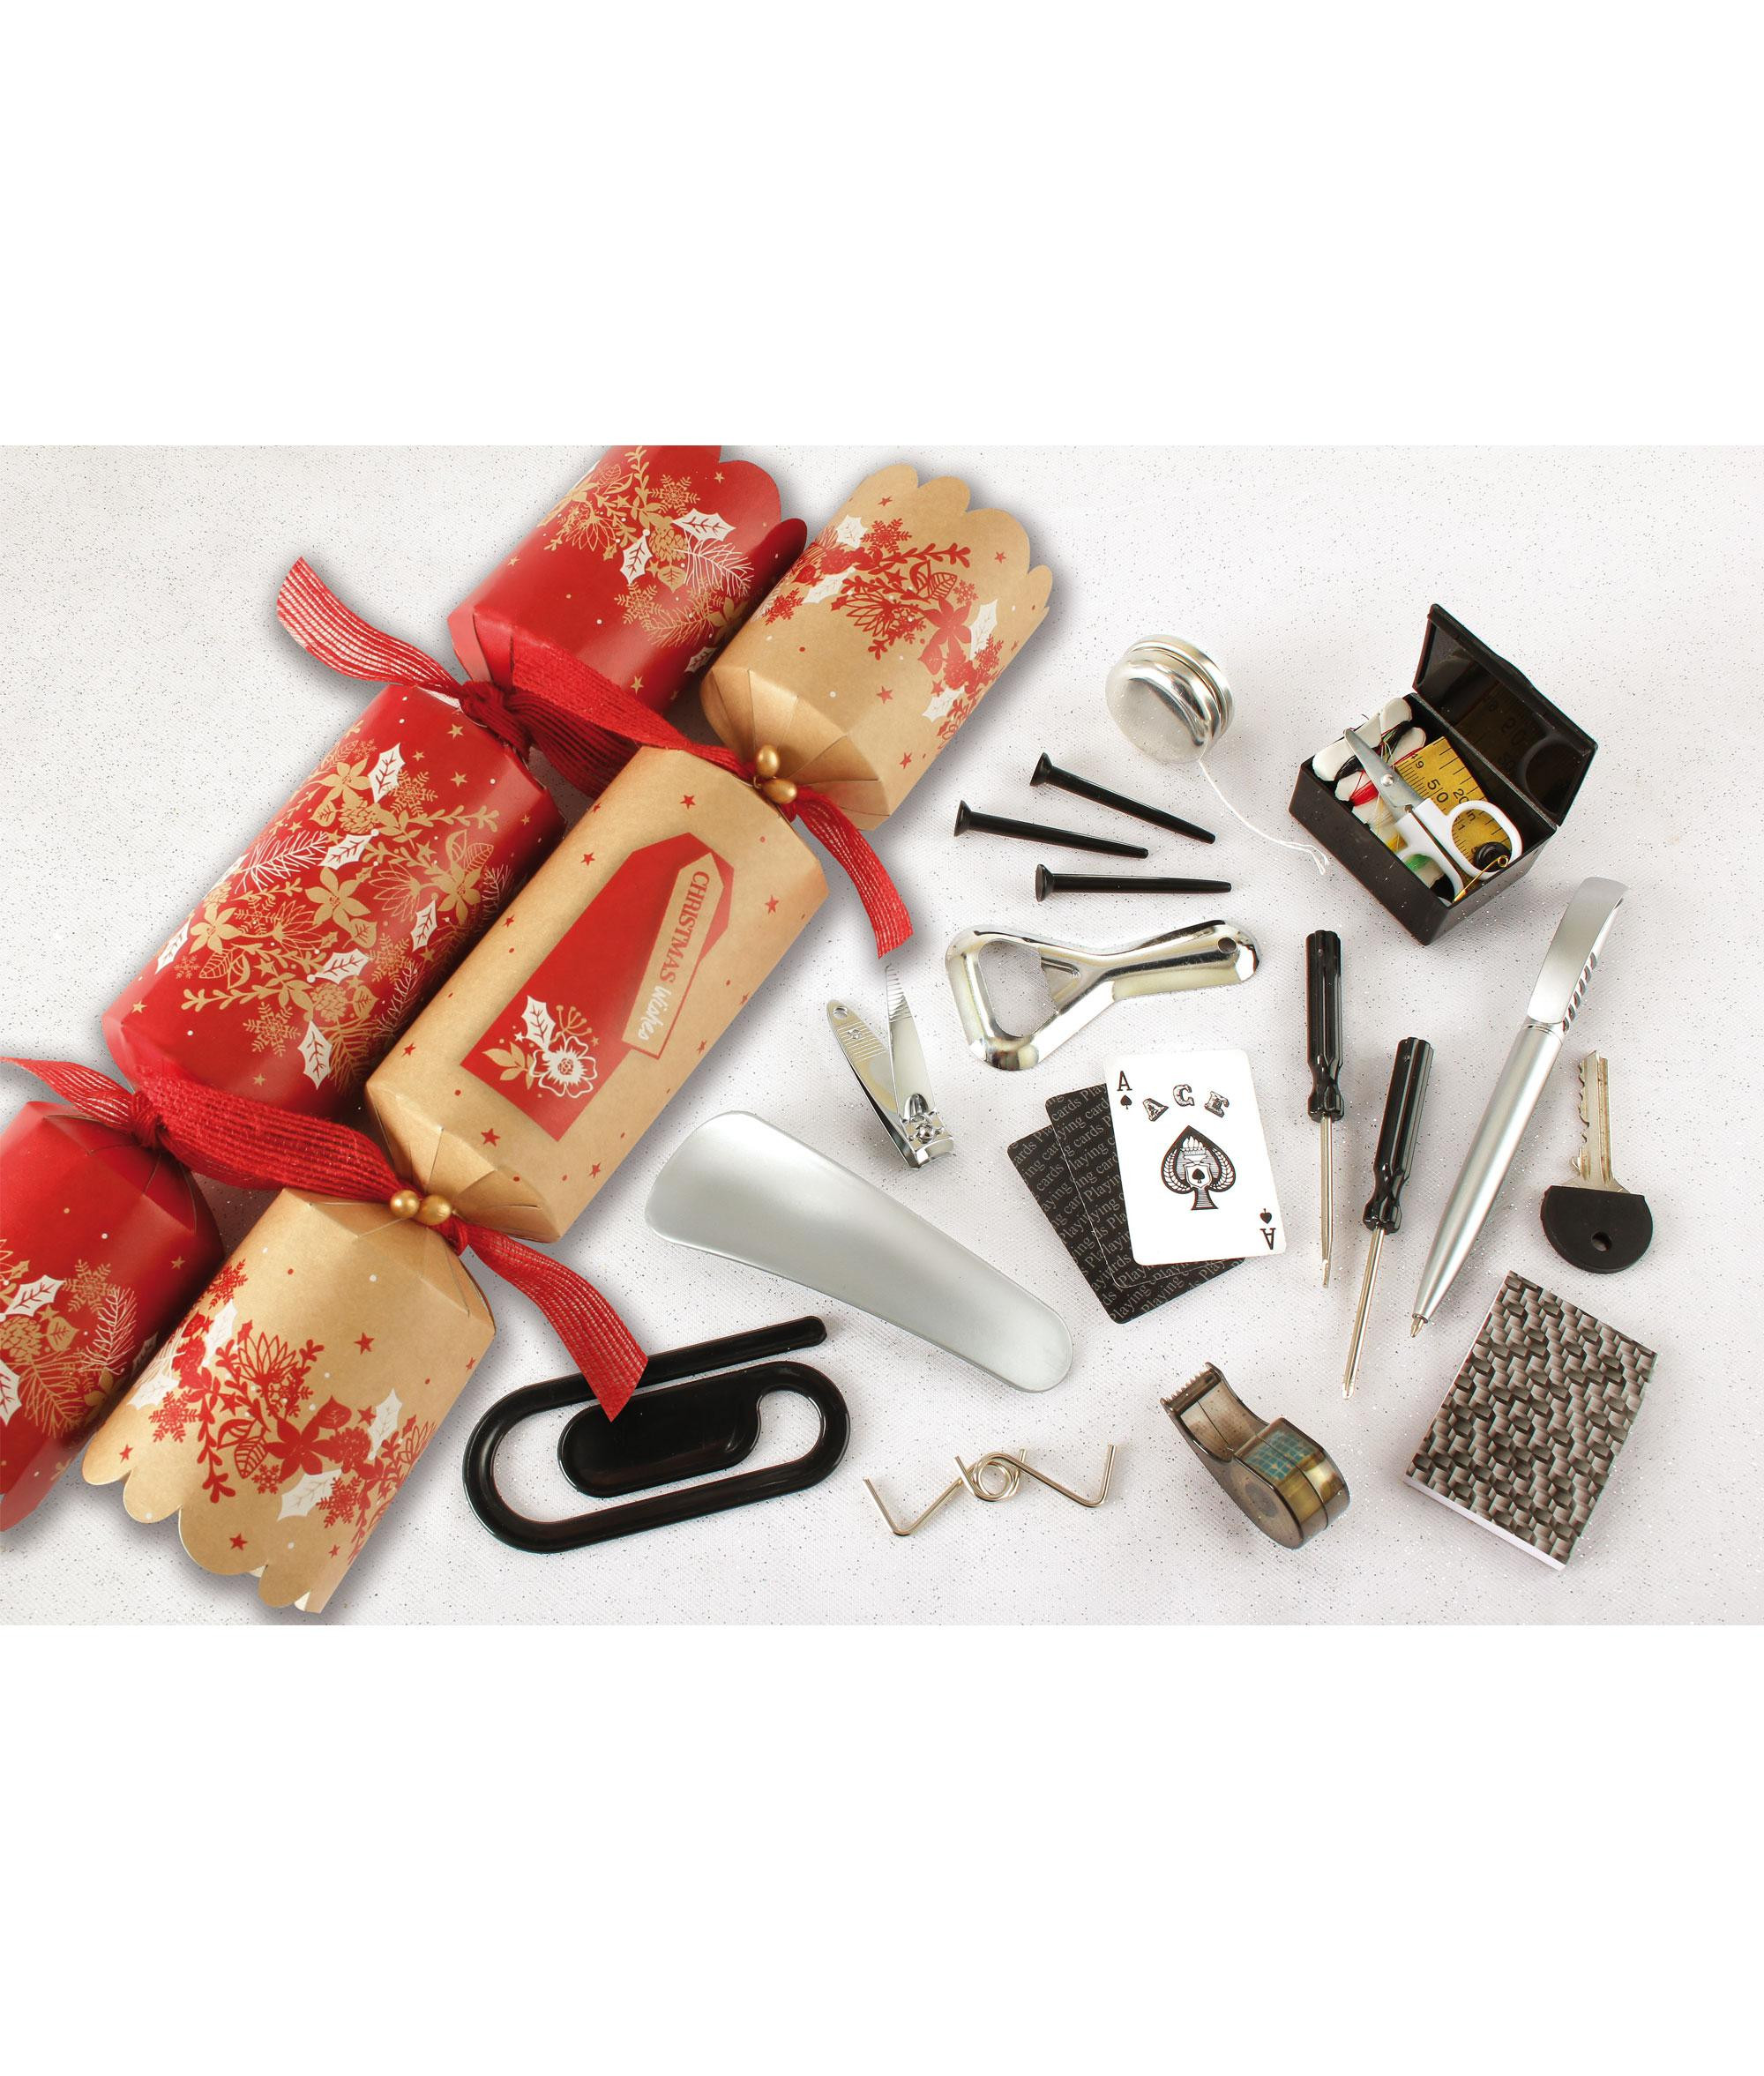 Tom Smith Christmas Crackers
 Premium Tom Smith Crackers Pack of 8